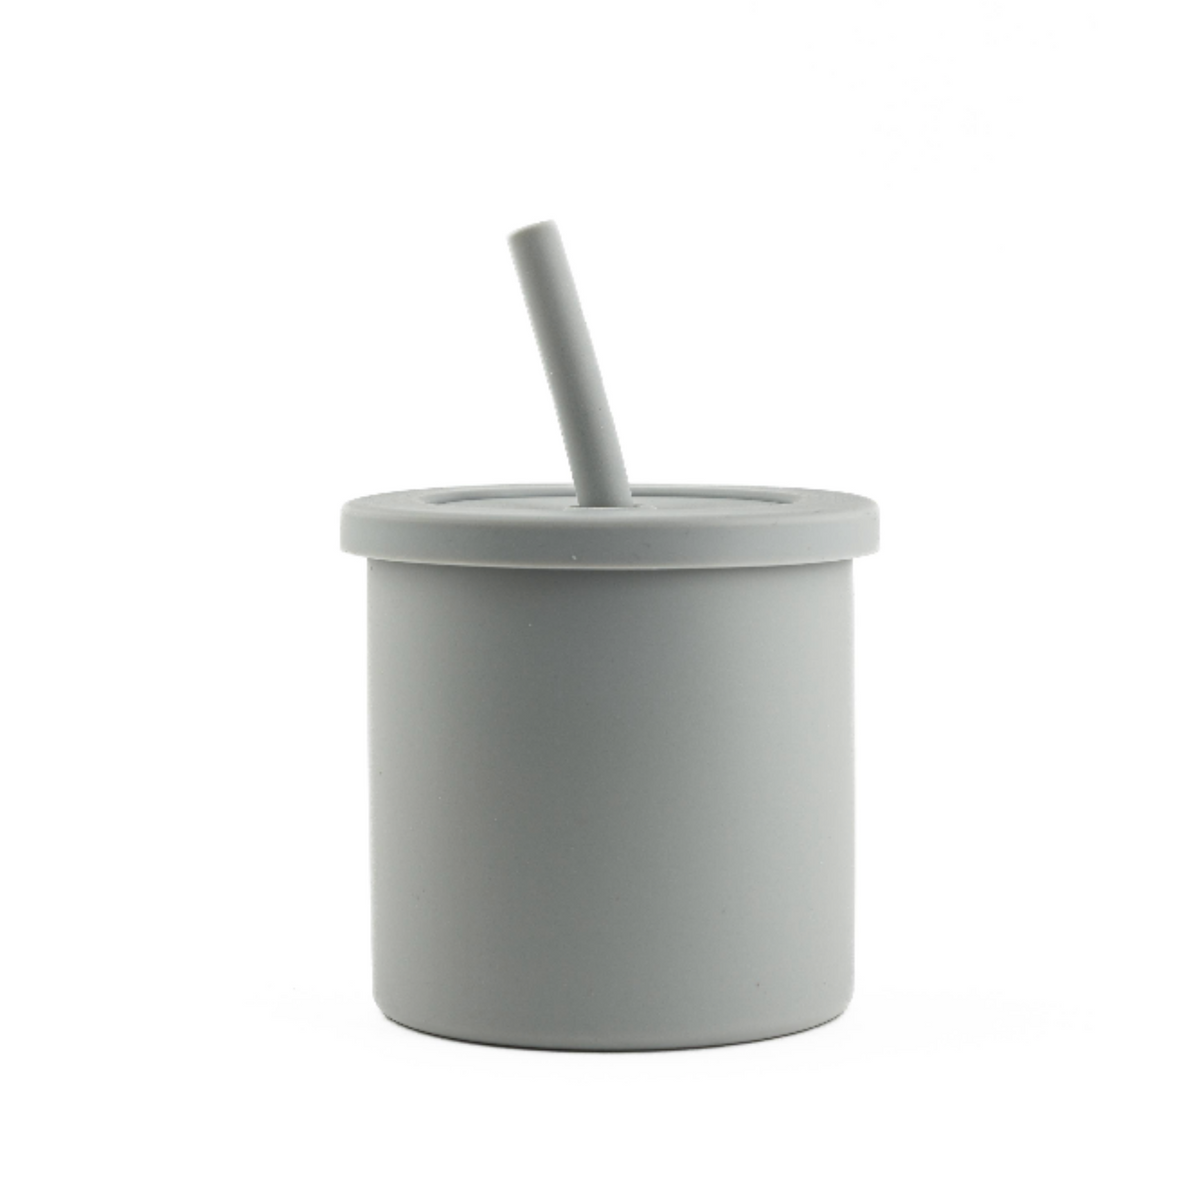 2 in 1 Straw Cup and Snack Container - Cool Tones: Grey